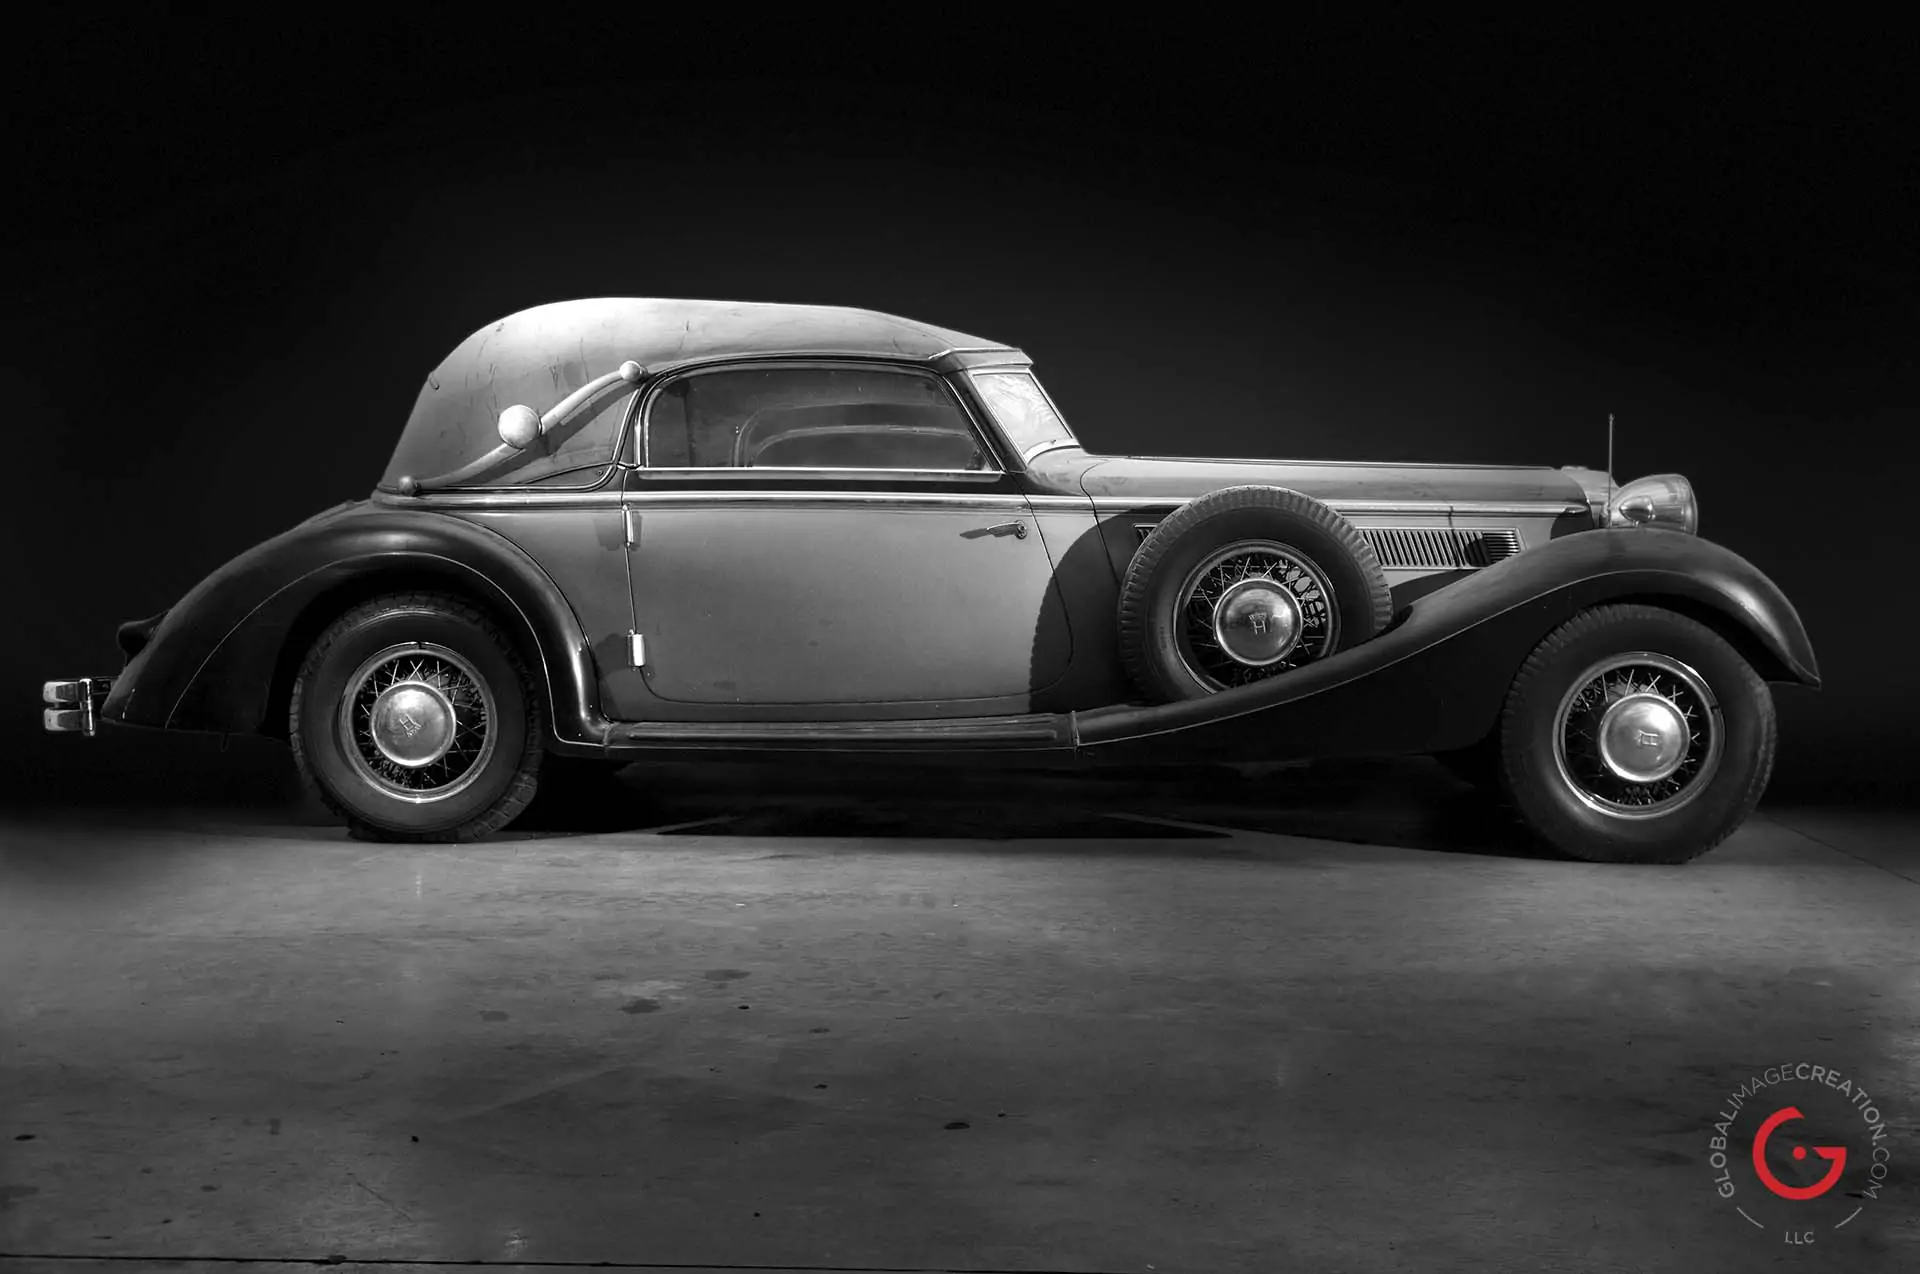 Full Side View - Horch Barn Find, Branson Classic Car Auction - Professional Car Photographer, Automotive Photography